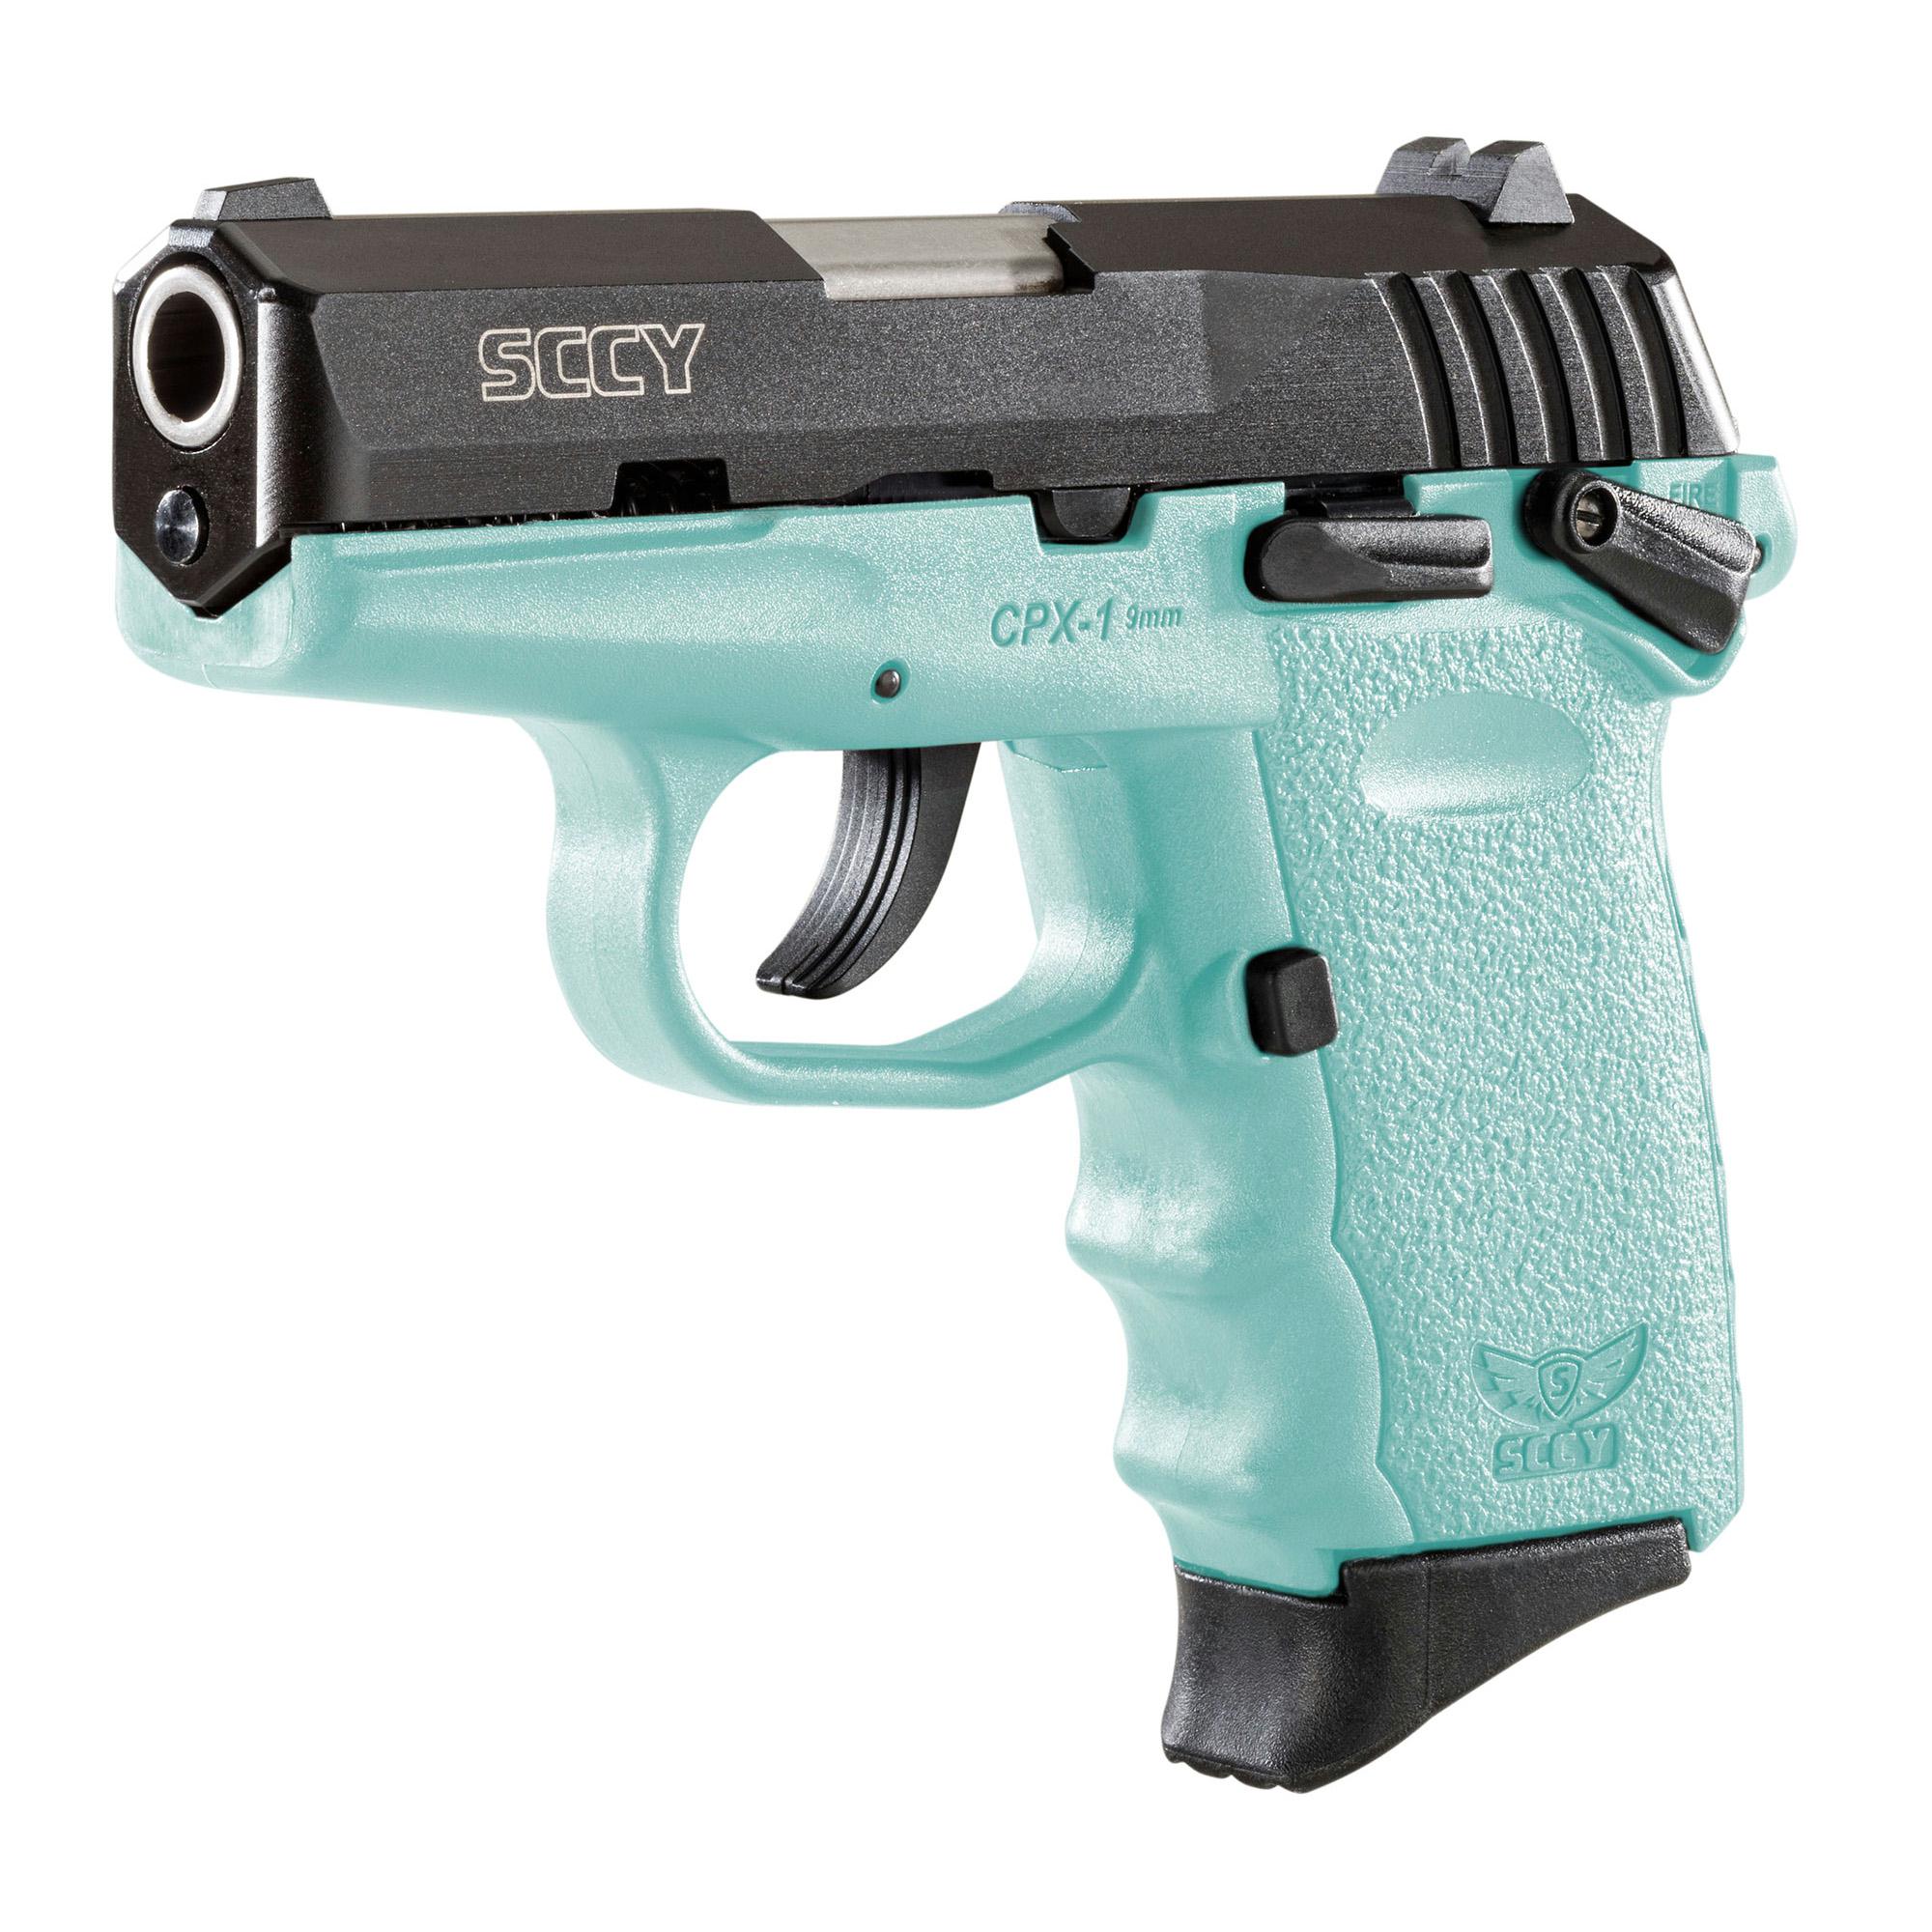 Sccy Cpx-1, Double Action Only, Compact Pistol, 9mm, 3.1" Barrel, Poly...